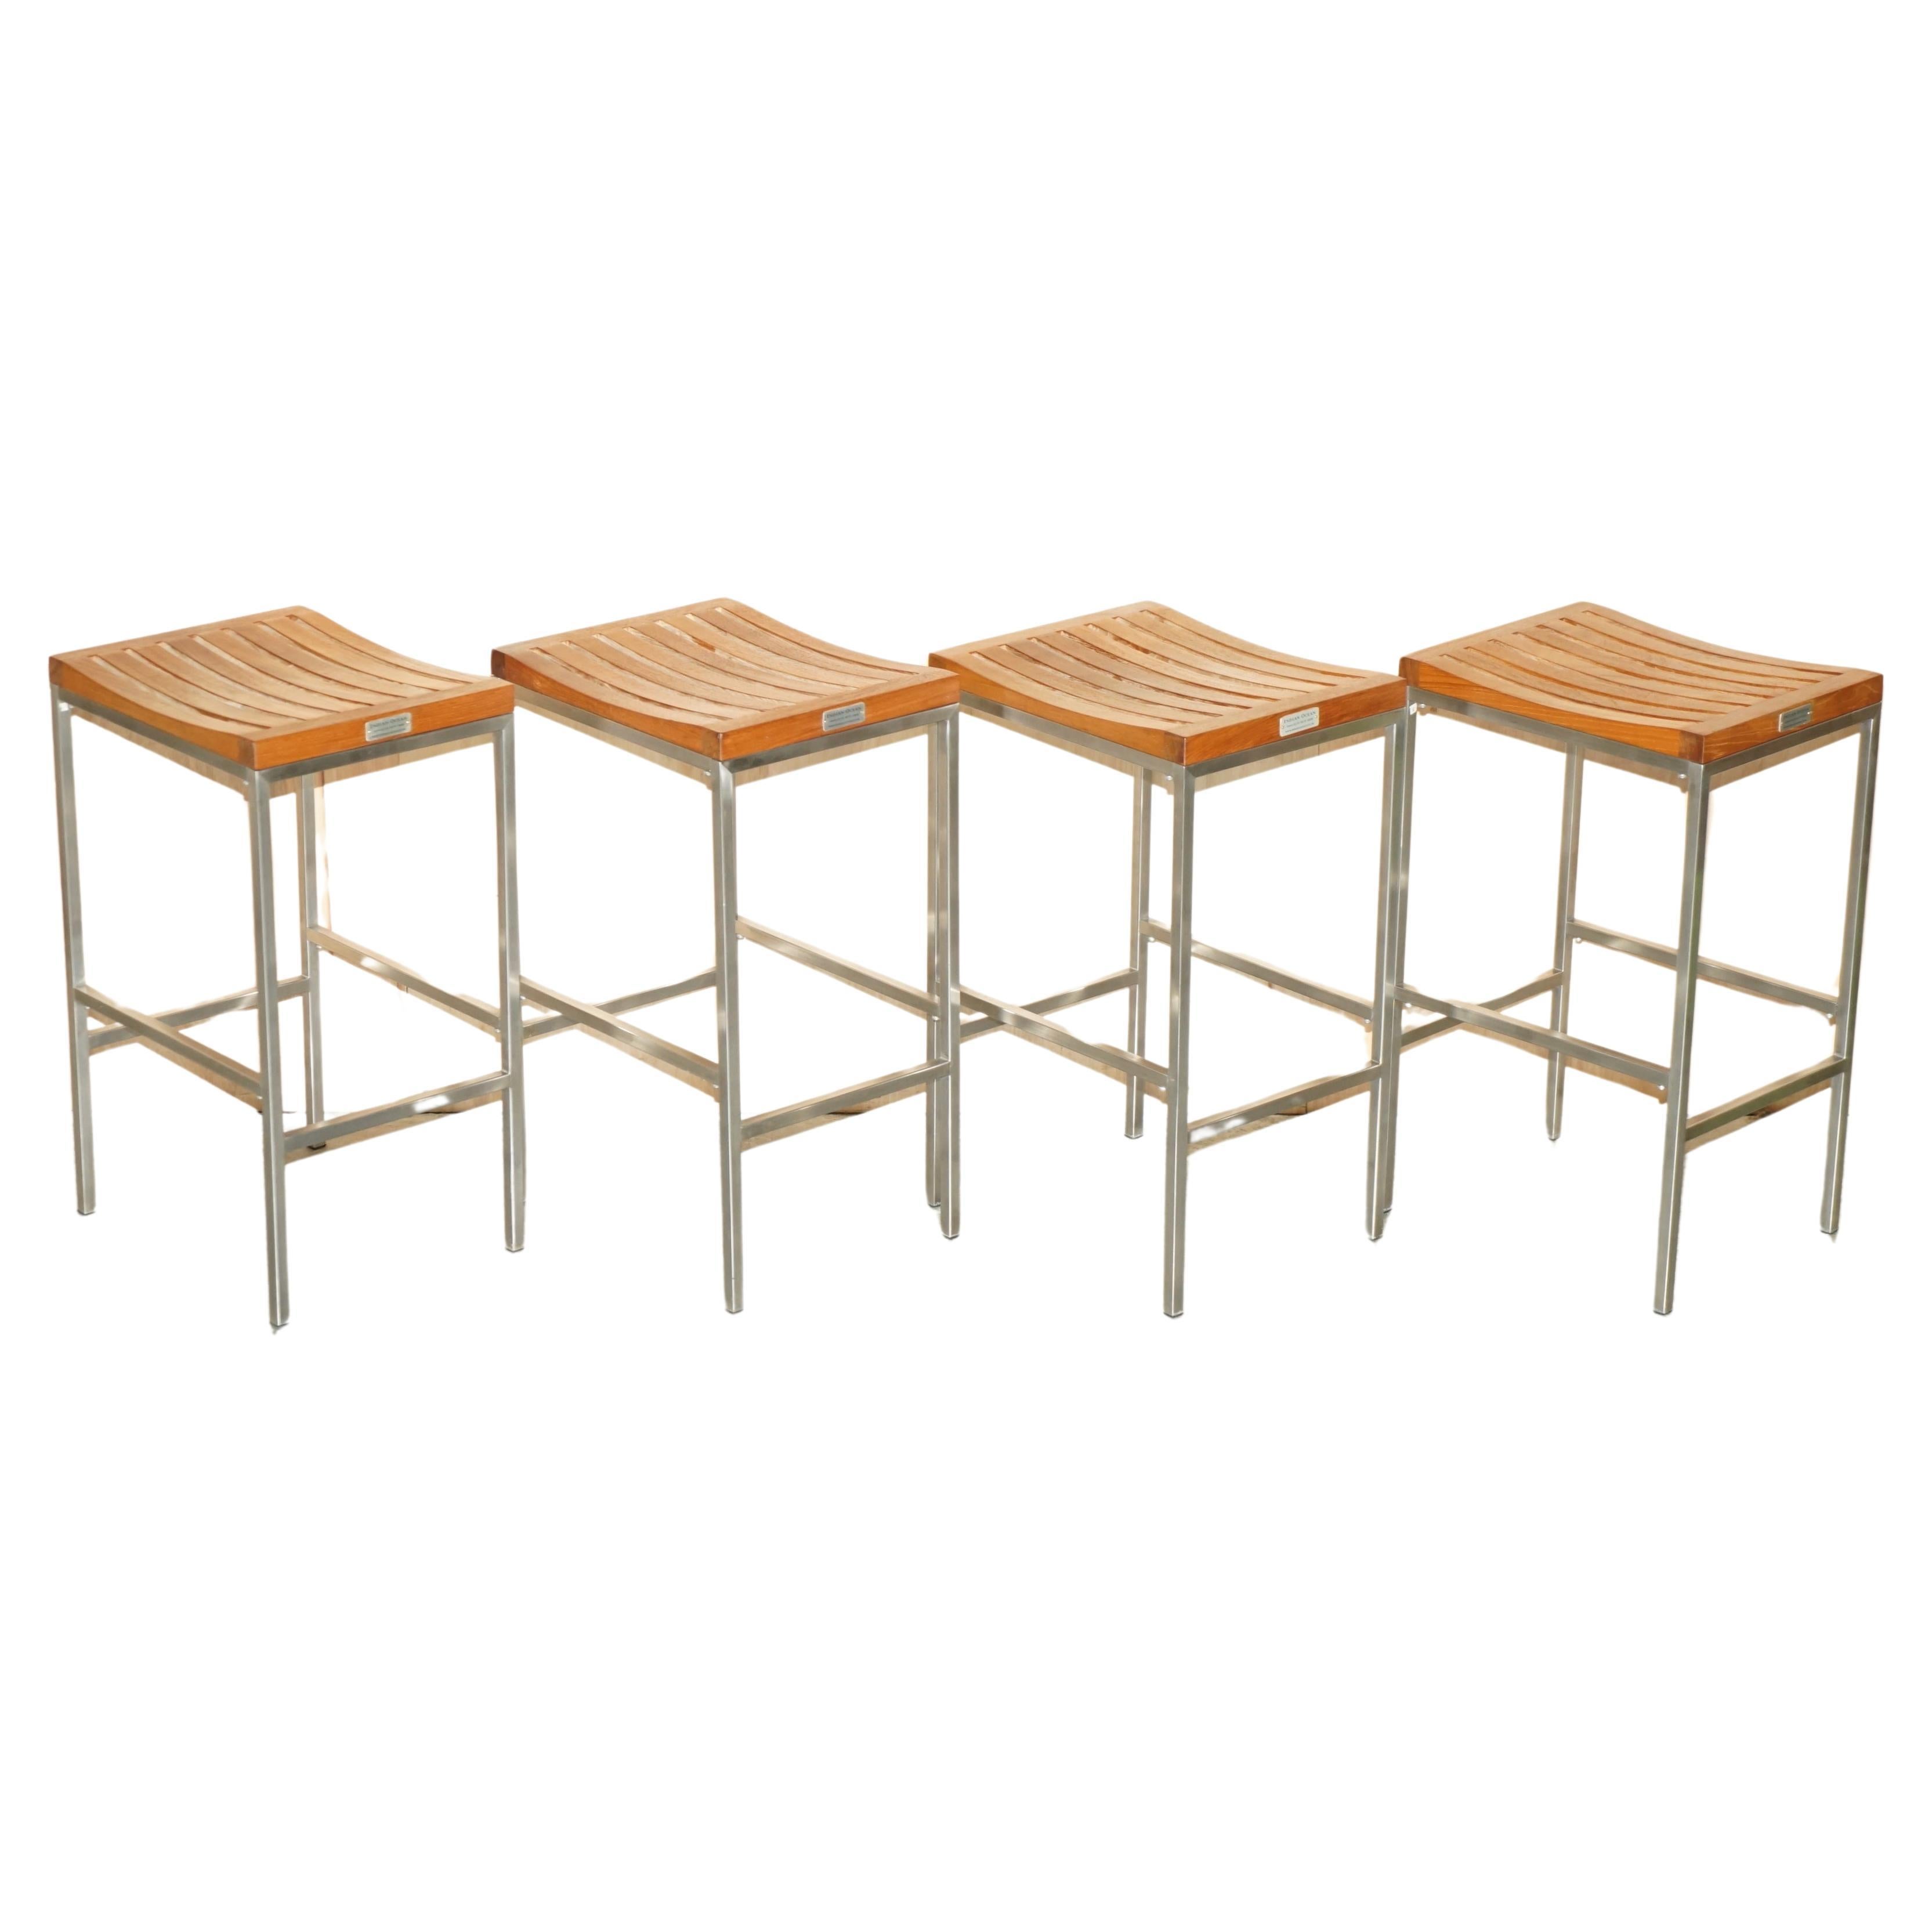 FINE SUiTE OF FOUR INDIAN OCEAN METAL AND SLATTED WOOD BAR OR KITCHEN STOOLS